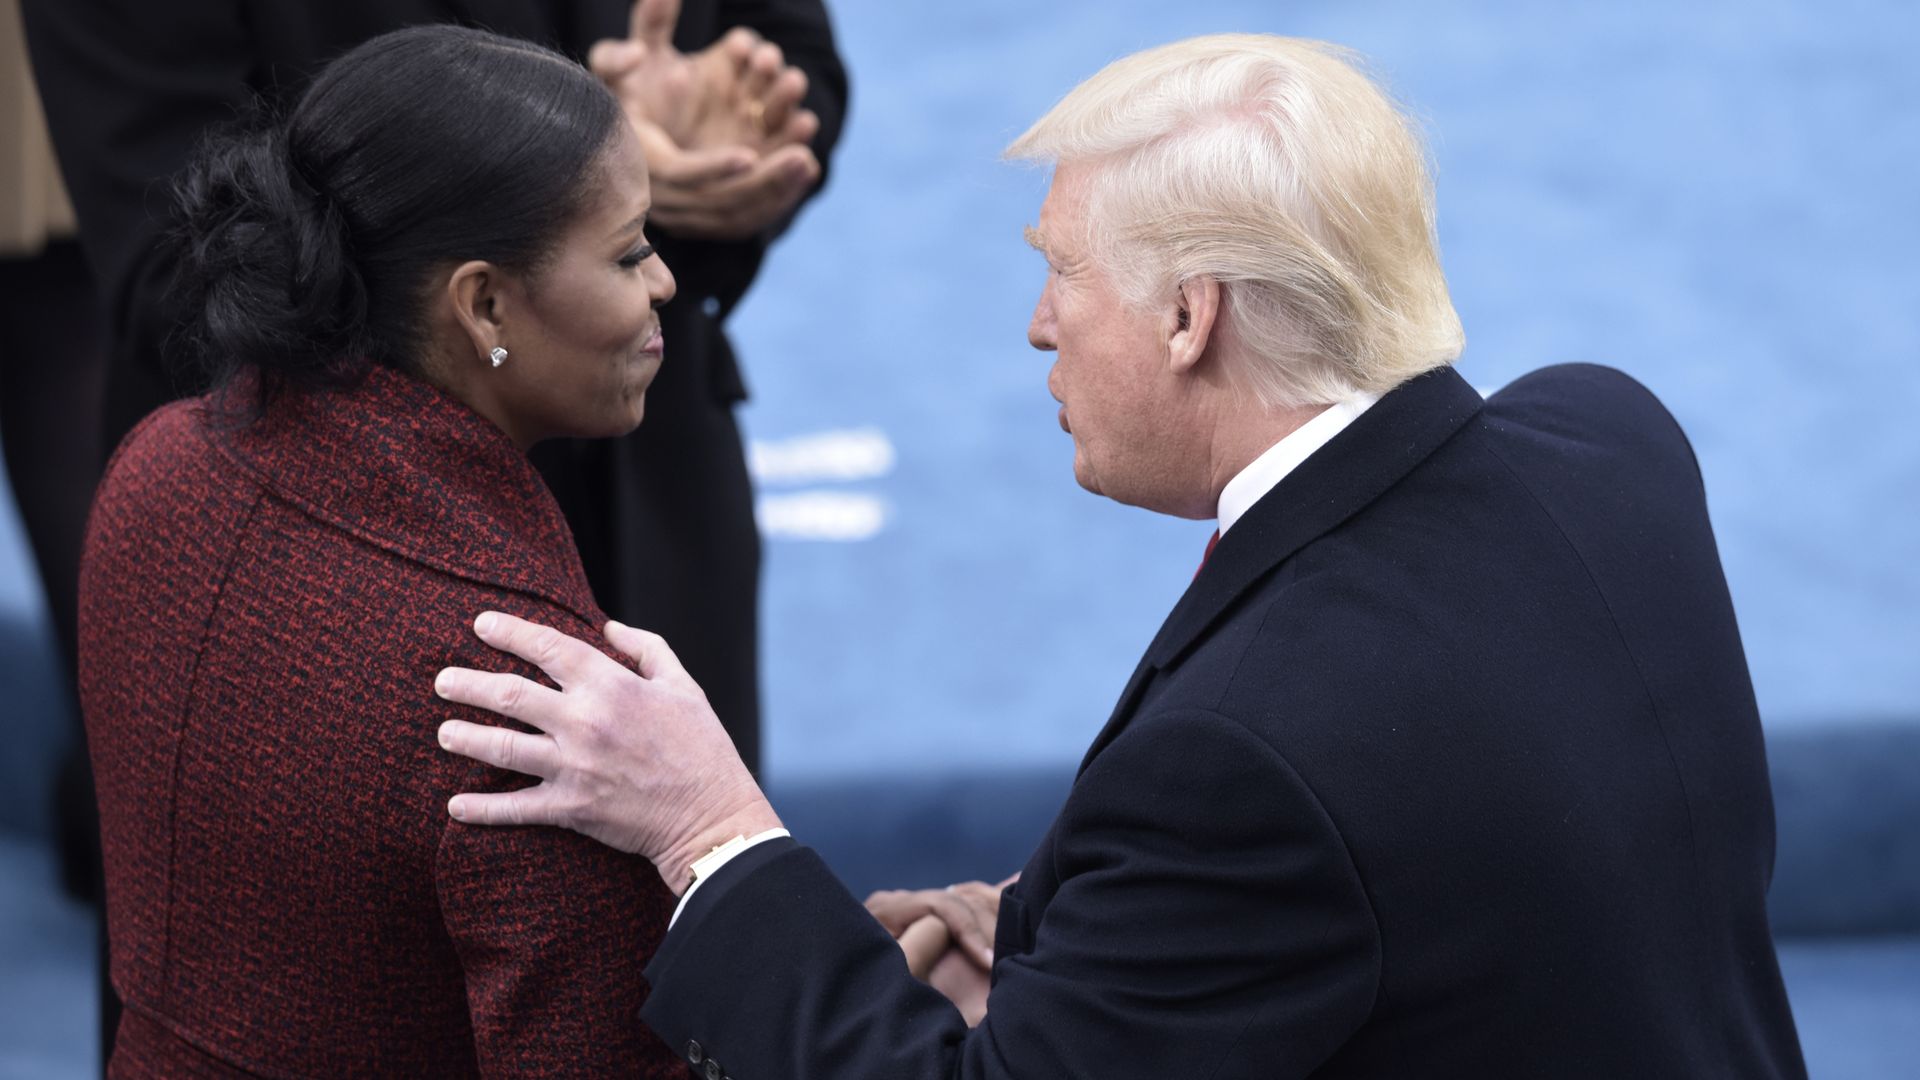 President Trump and Michelle Obama shake hands.